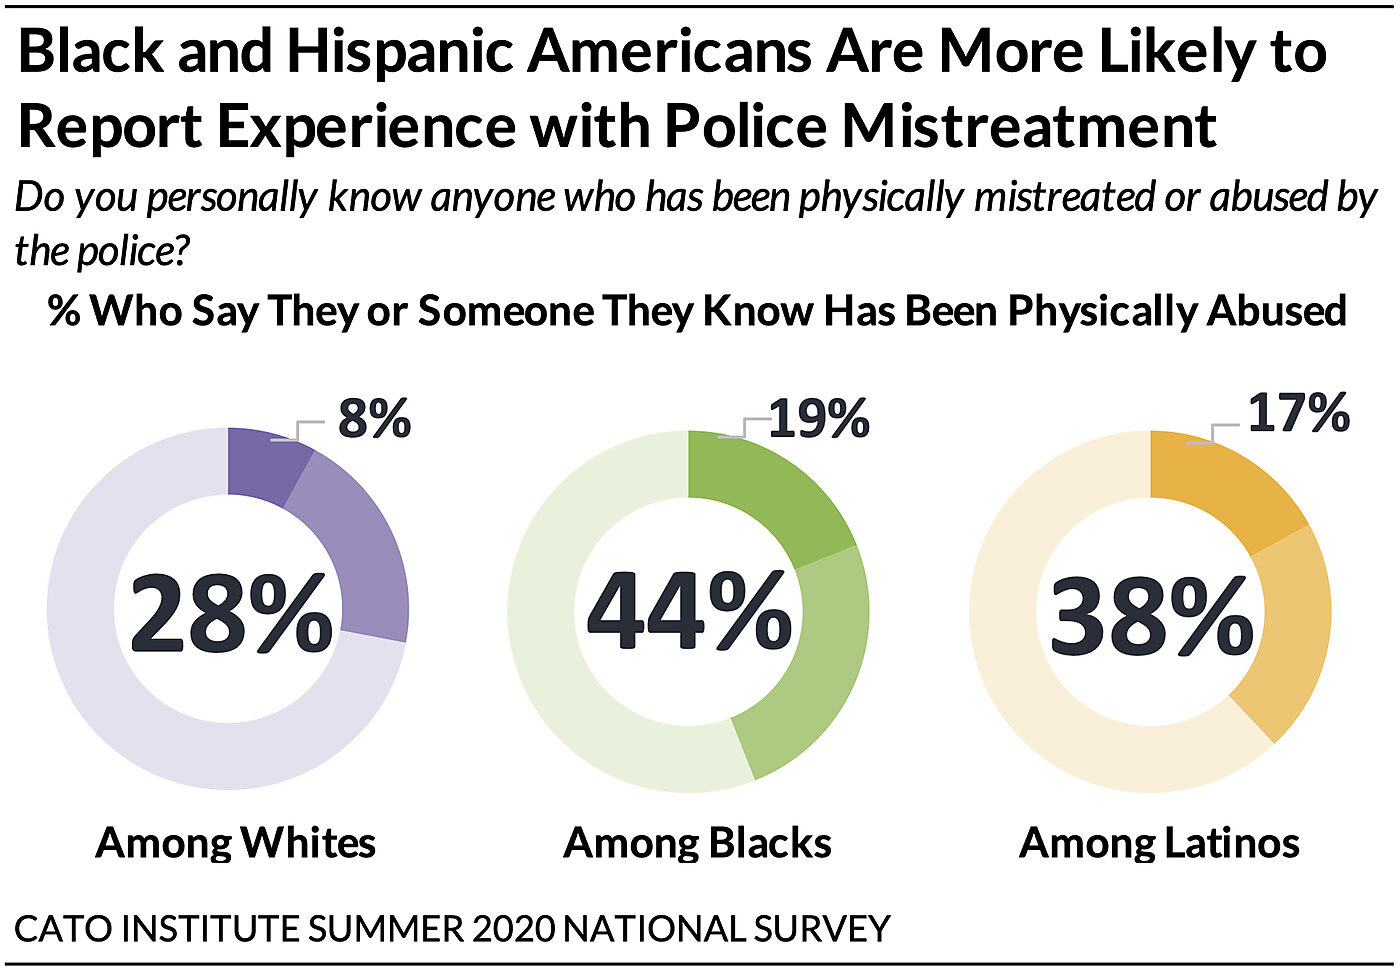 Black and Hispanic Americans Are More Likely to Report Experience with Police Mistreatment